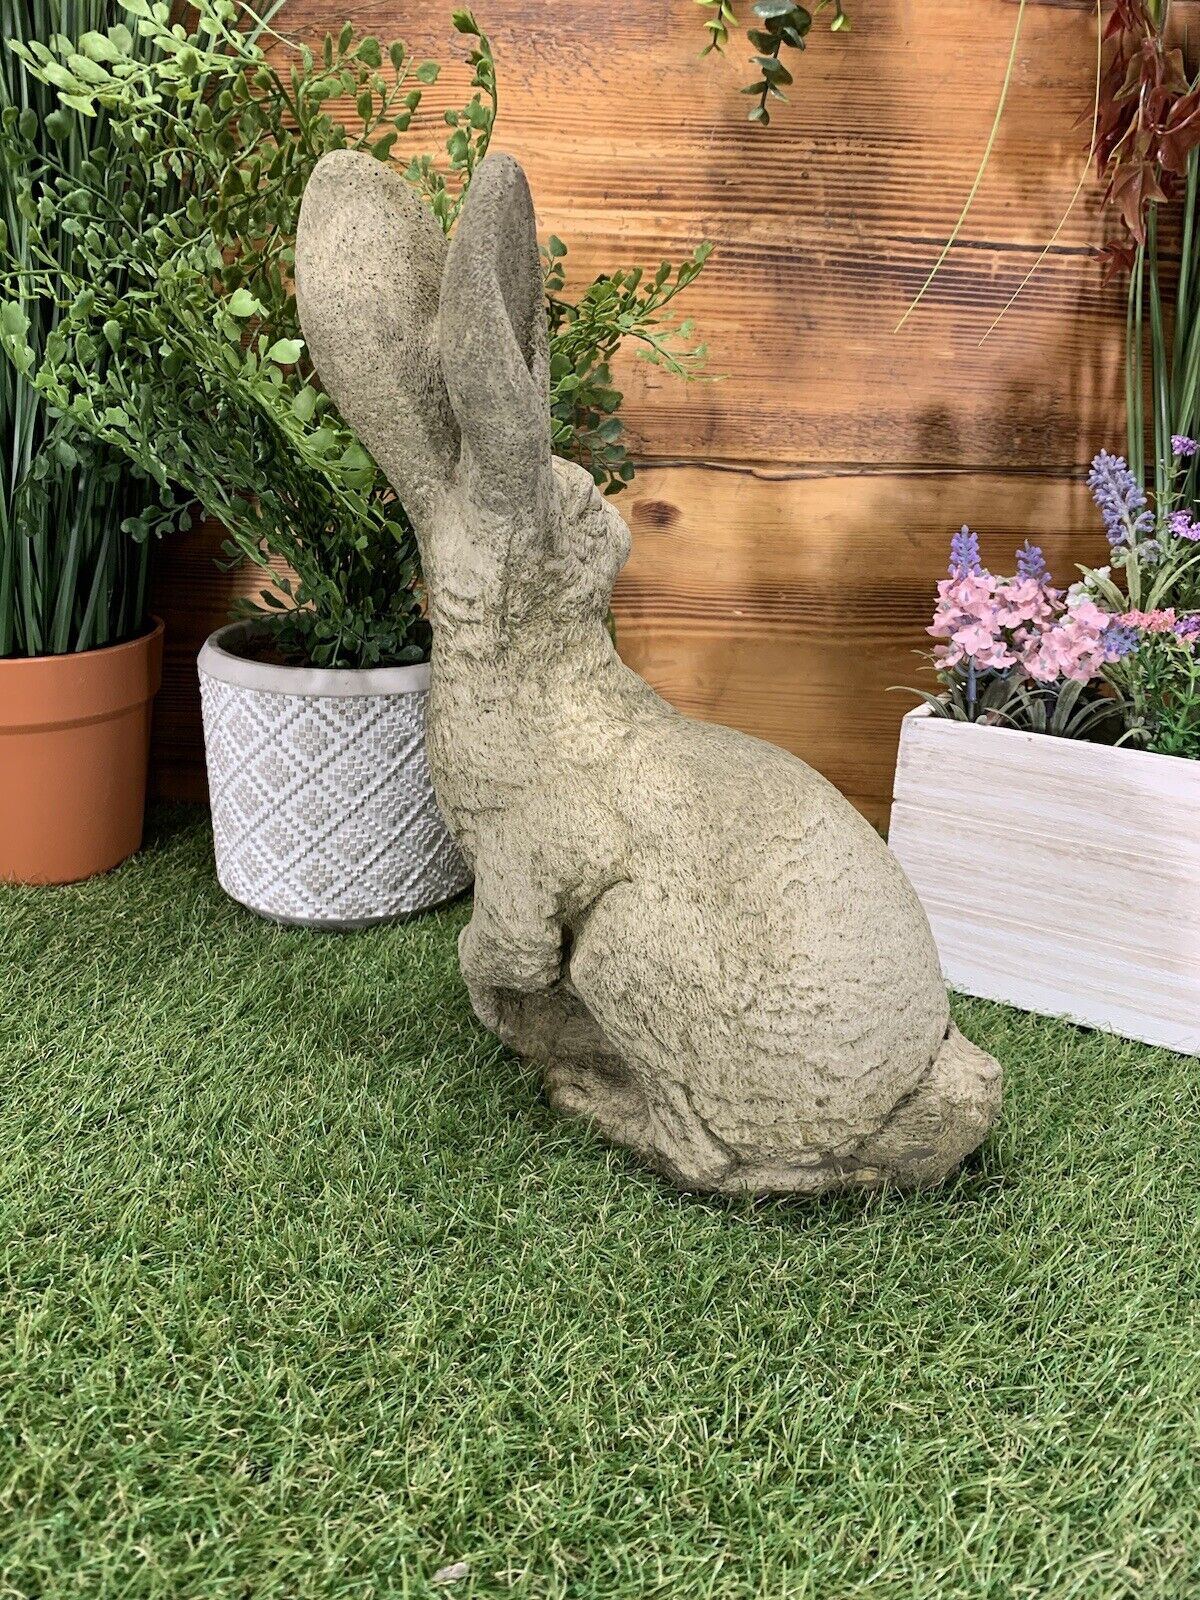 Large March Hare Statue